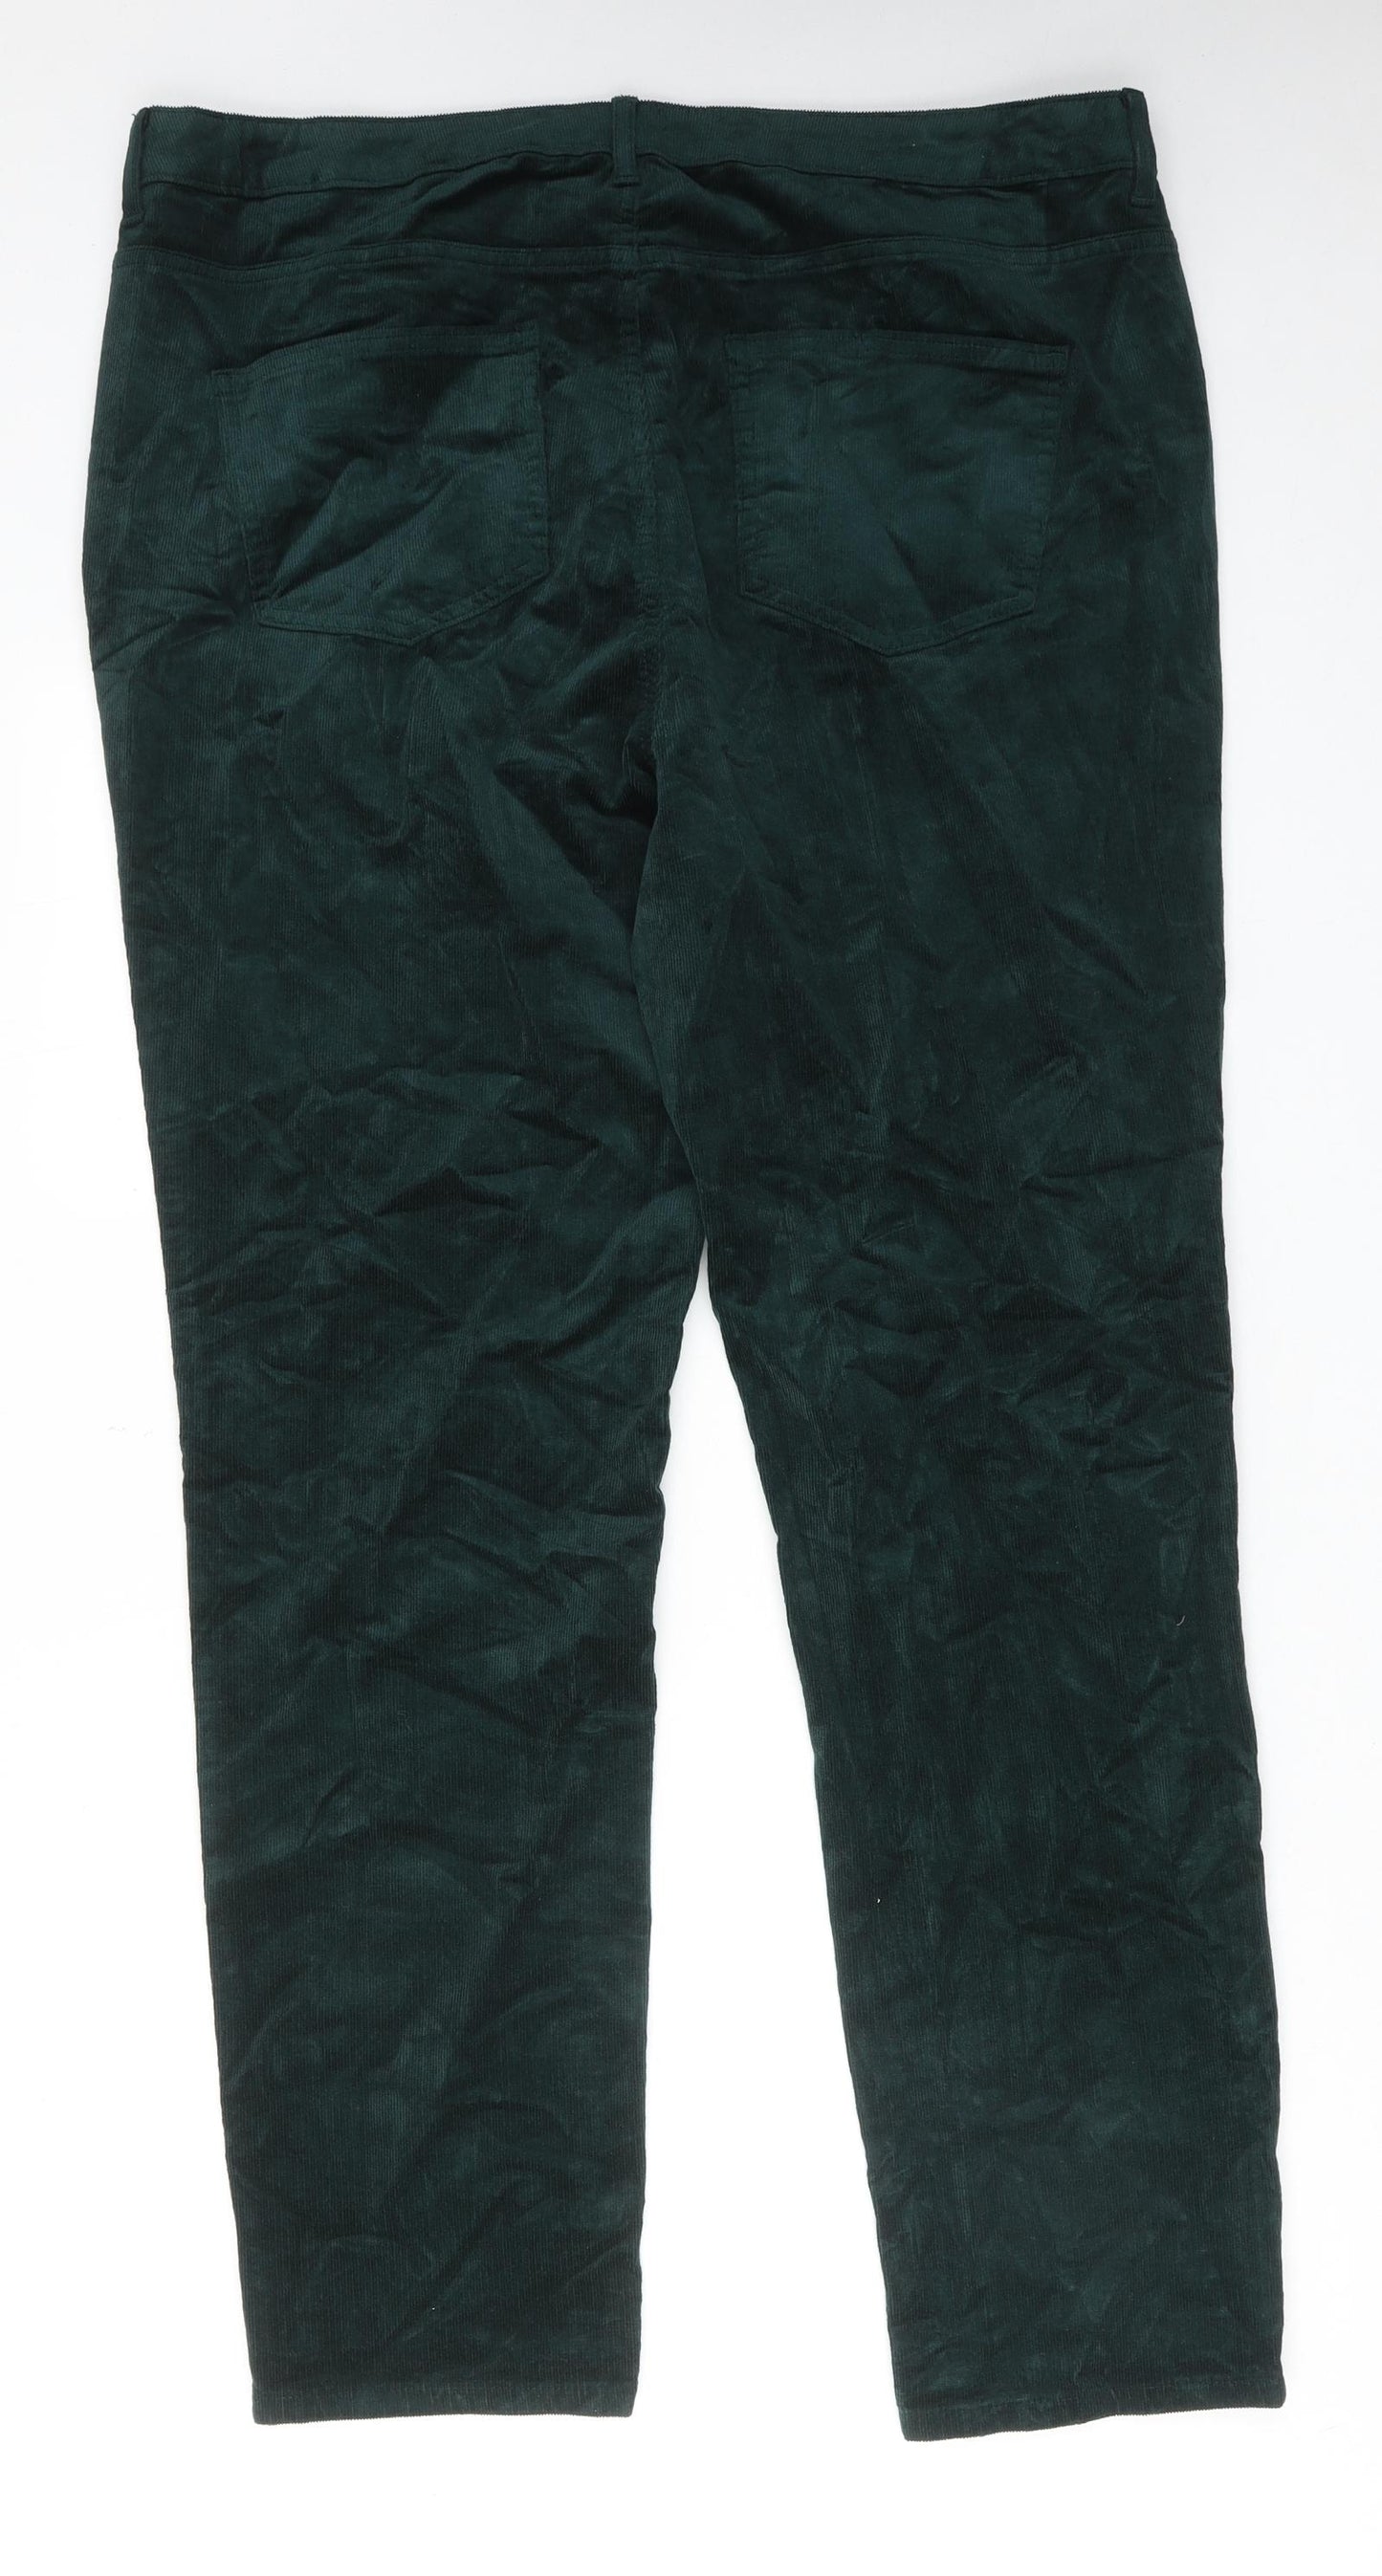 Marks and Spencer Womens Green Cotton Trousers Size 20 Regular Zip